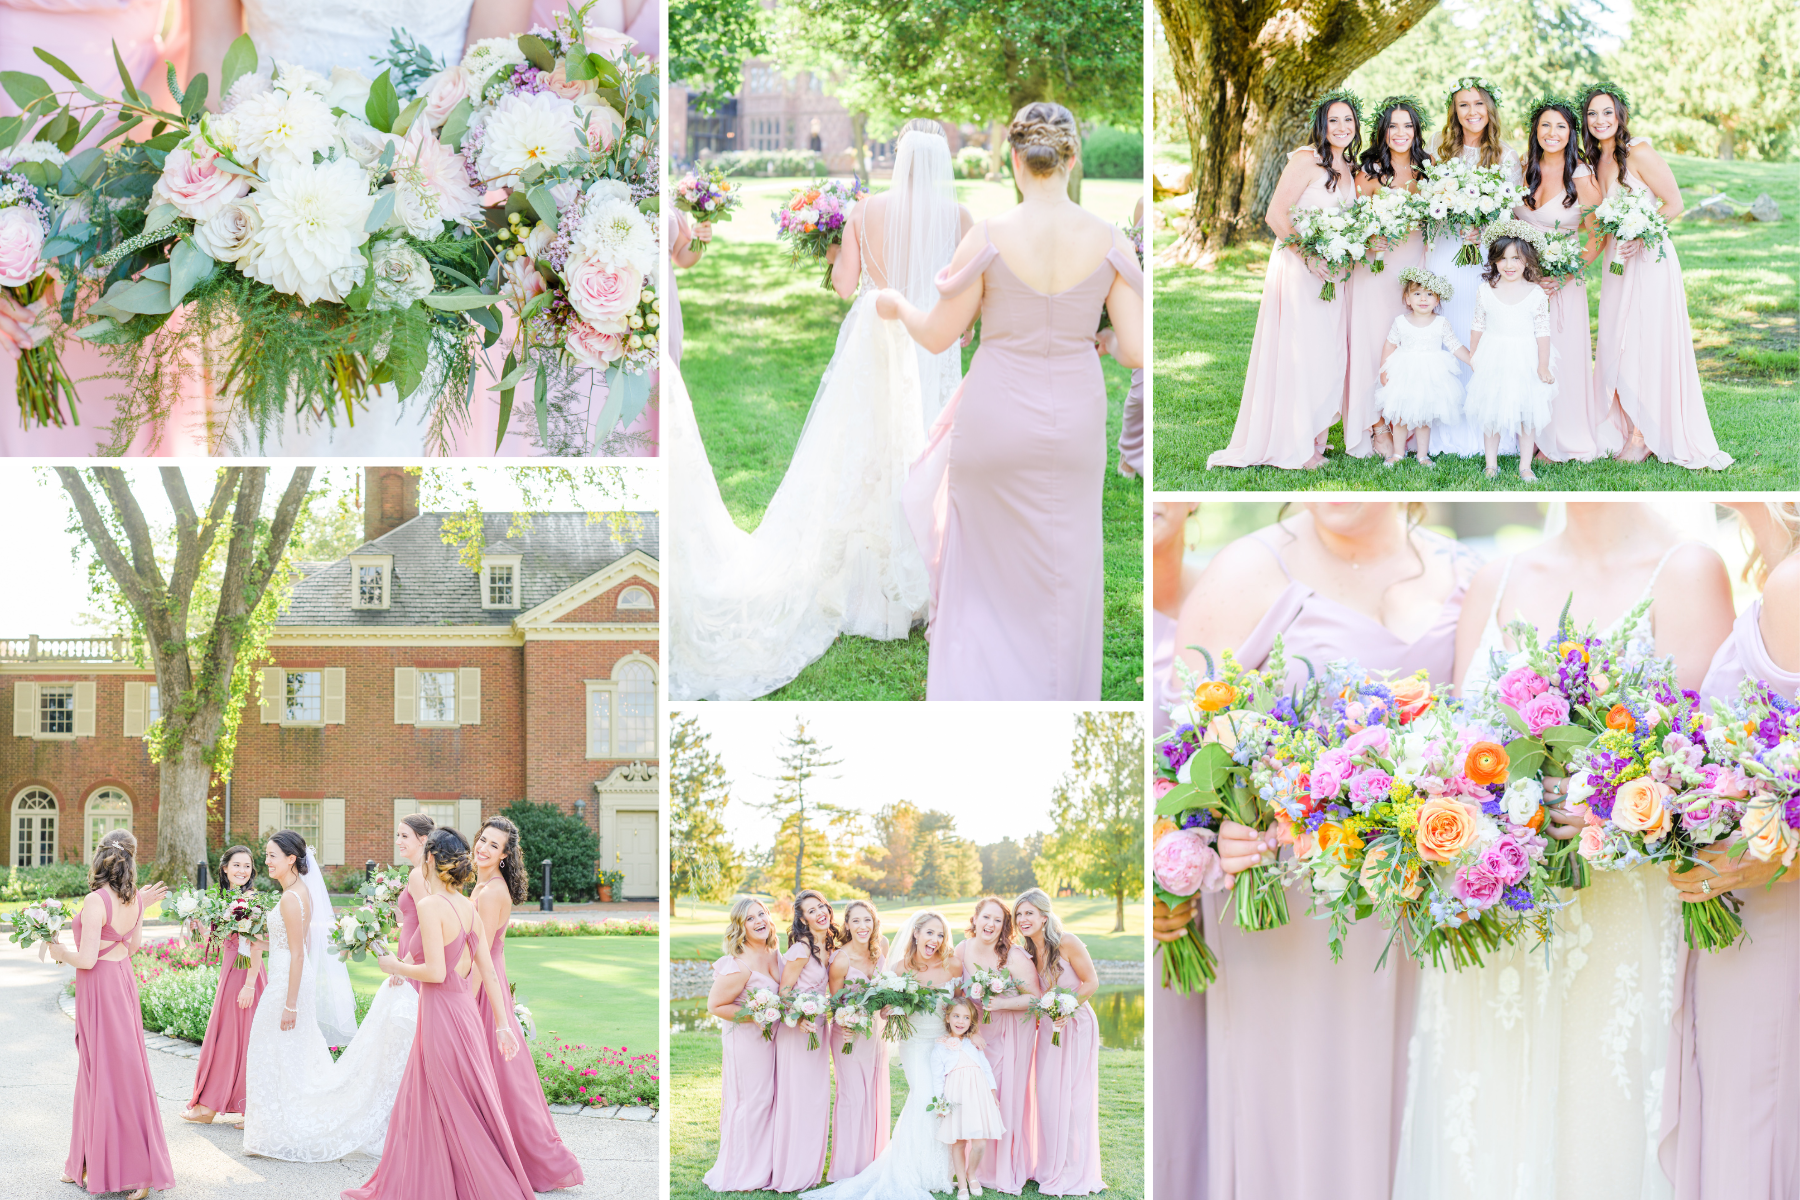 Tips for the best places to shop for bridesmaids dresses by Baltimore Photographer Cait Kramer